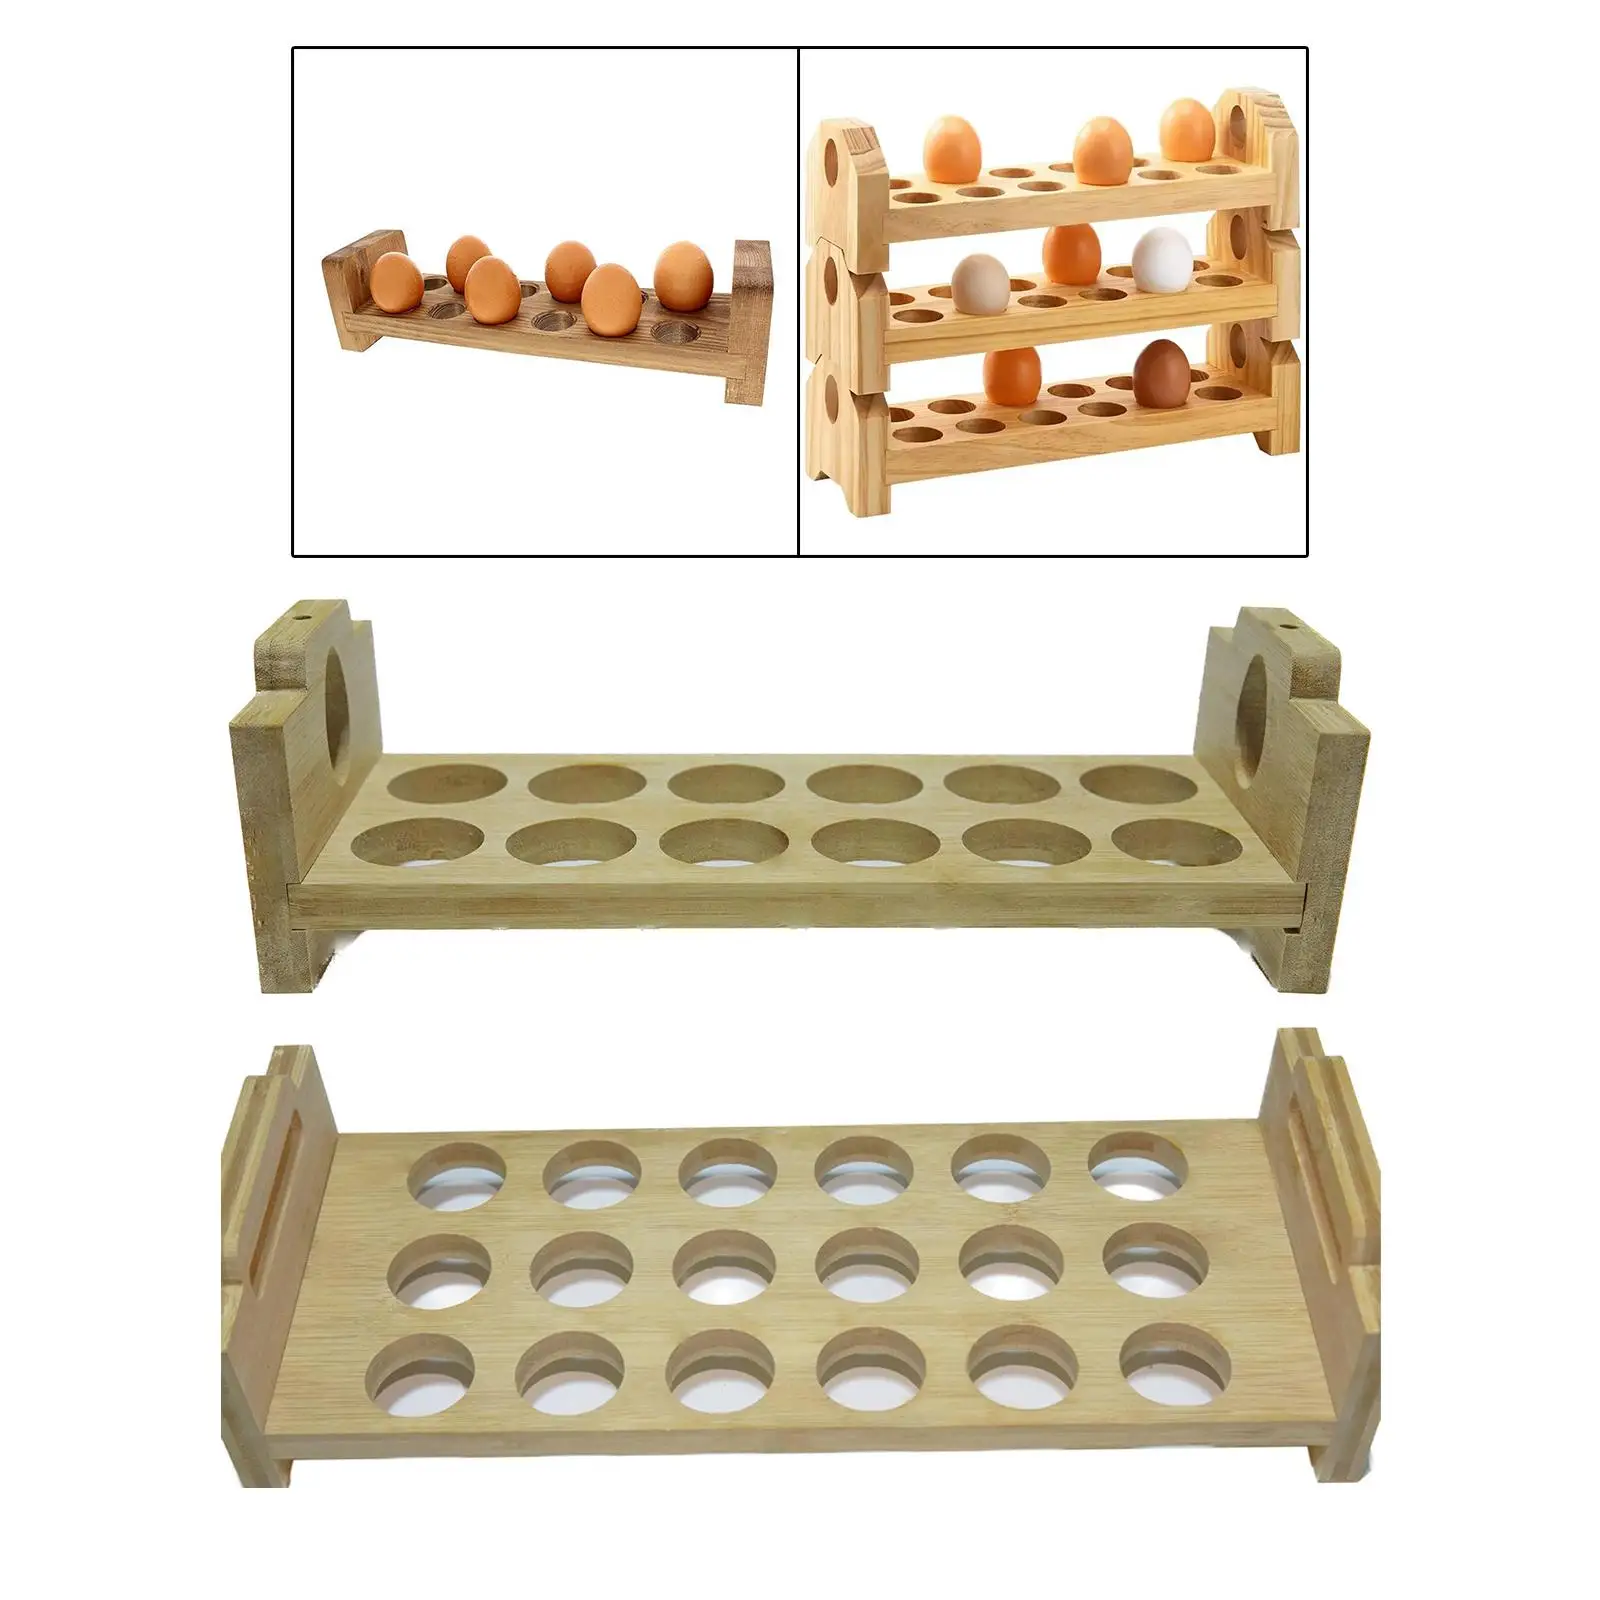 Egg Tray Counter Top Rustic Wooden Egg Holder Egg Container Rack for Kitchens Supermarket Refrigerator Pantry Necessities